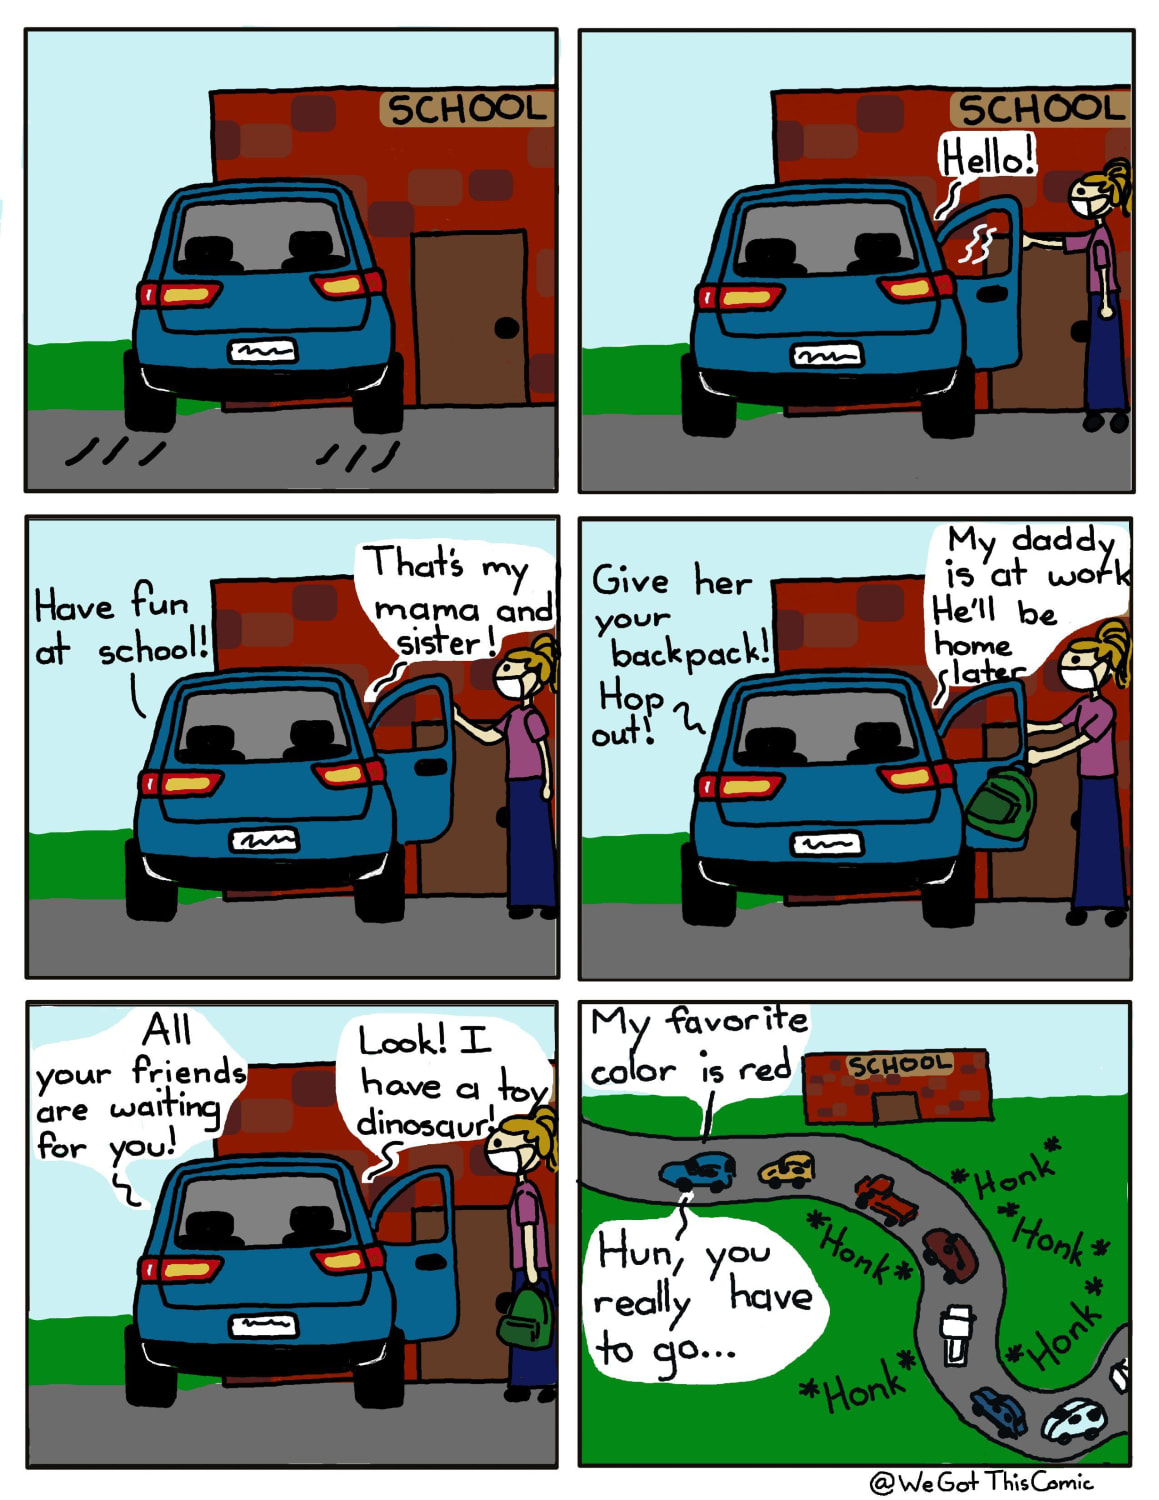 The trouble of a friendly kid in the carpool line